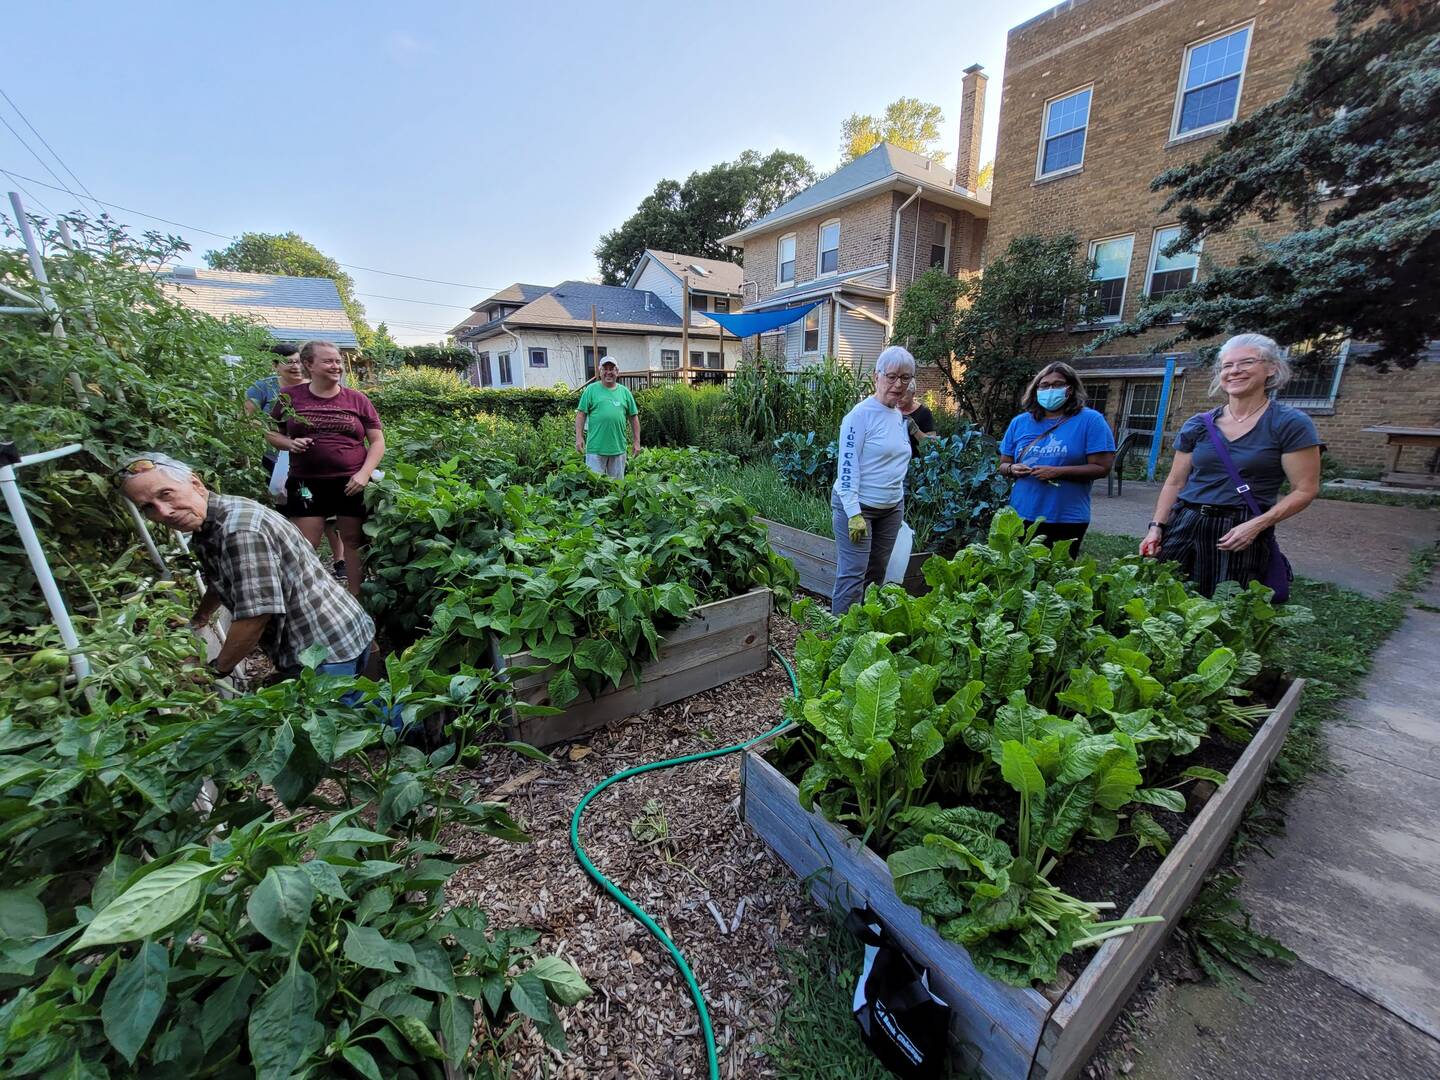 Volunteers work the garden at Ascension Parish in Oak Park, Ill. This season, they harvested more than 3,000 pounds of produce for the food pantry at St. Martin de Porres, an inner city parish in Chicago. (Photo courtesy John Owens)